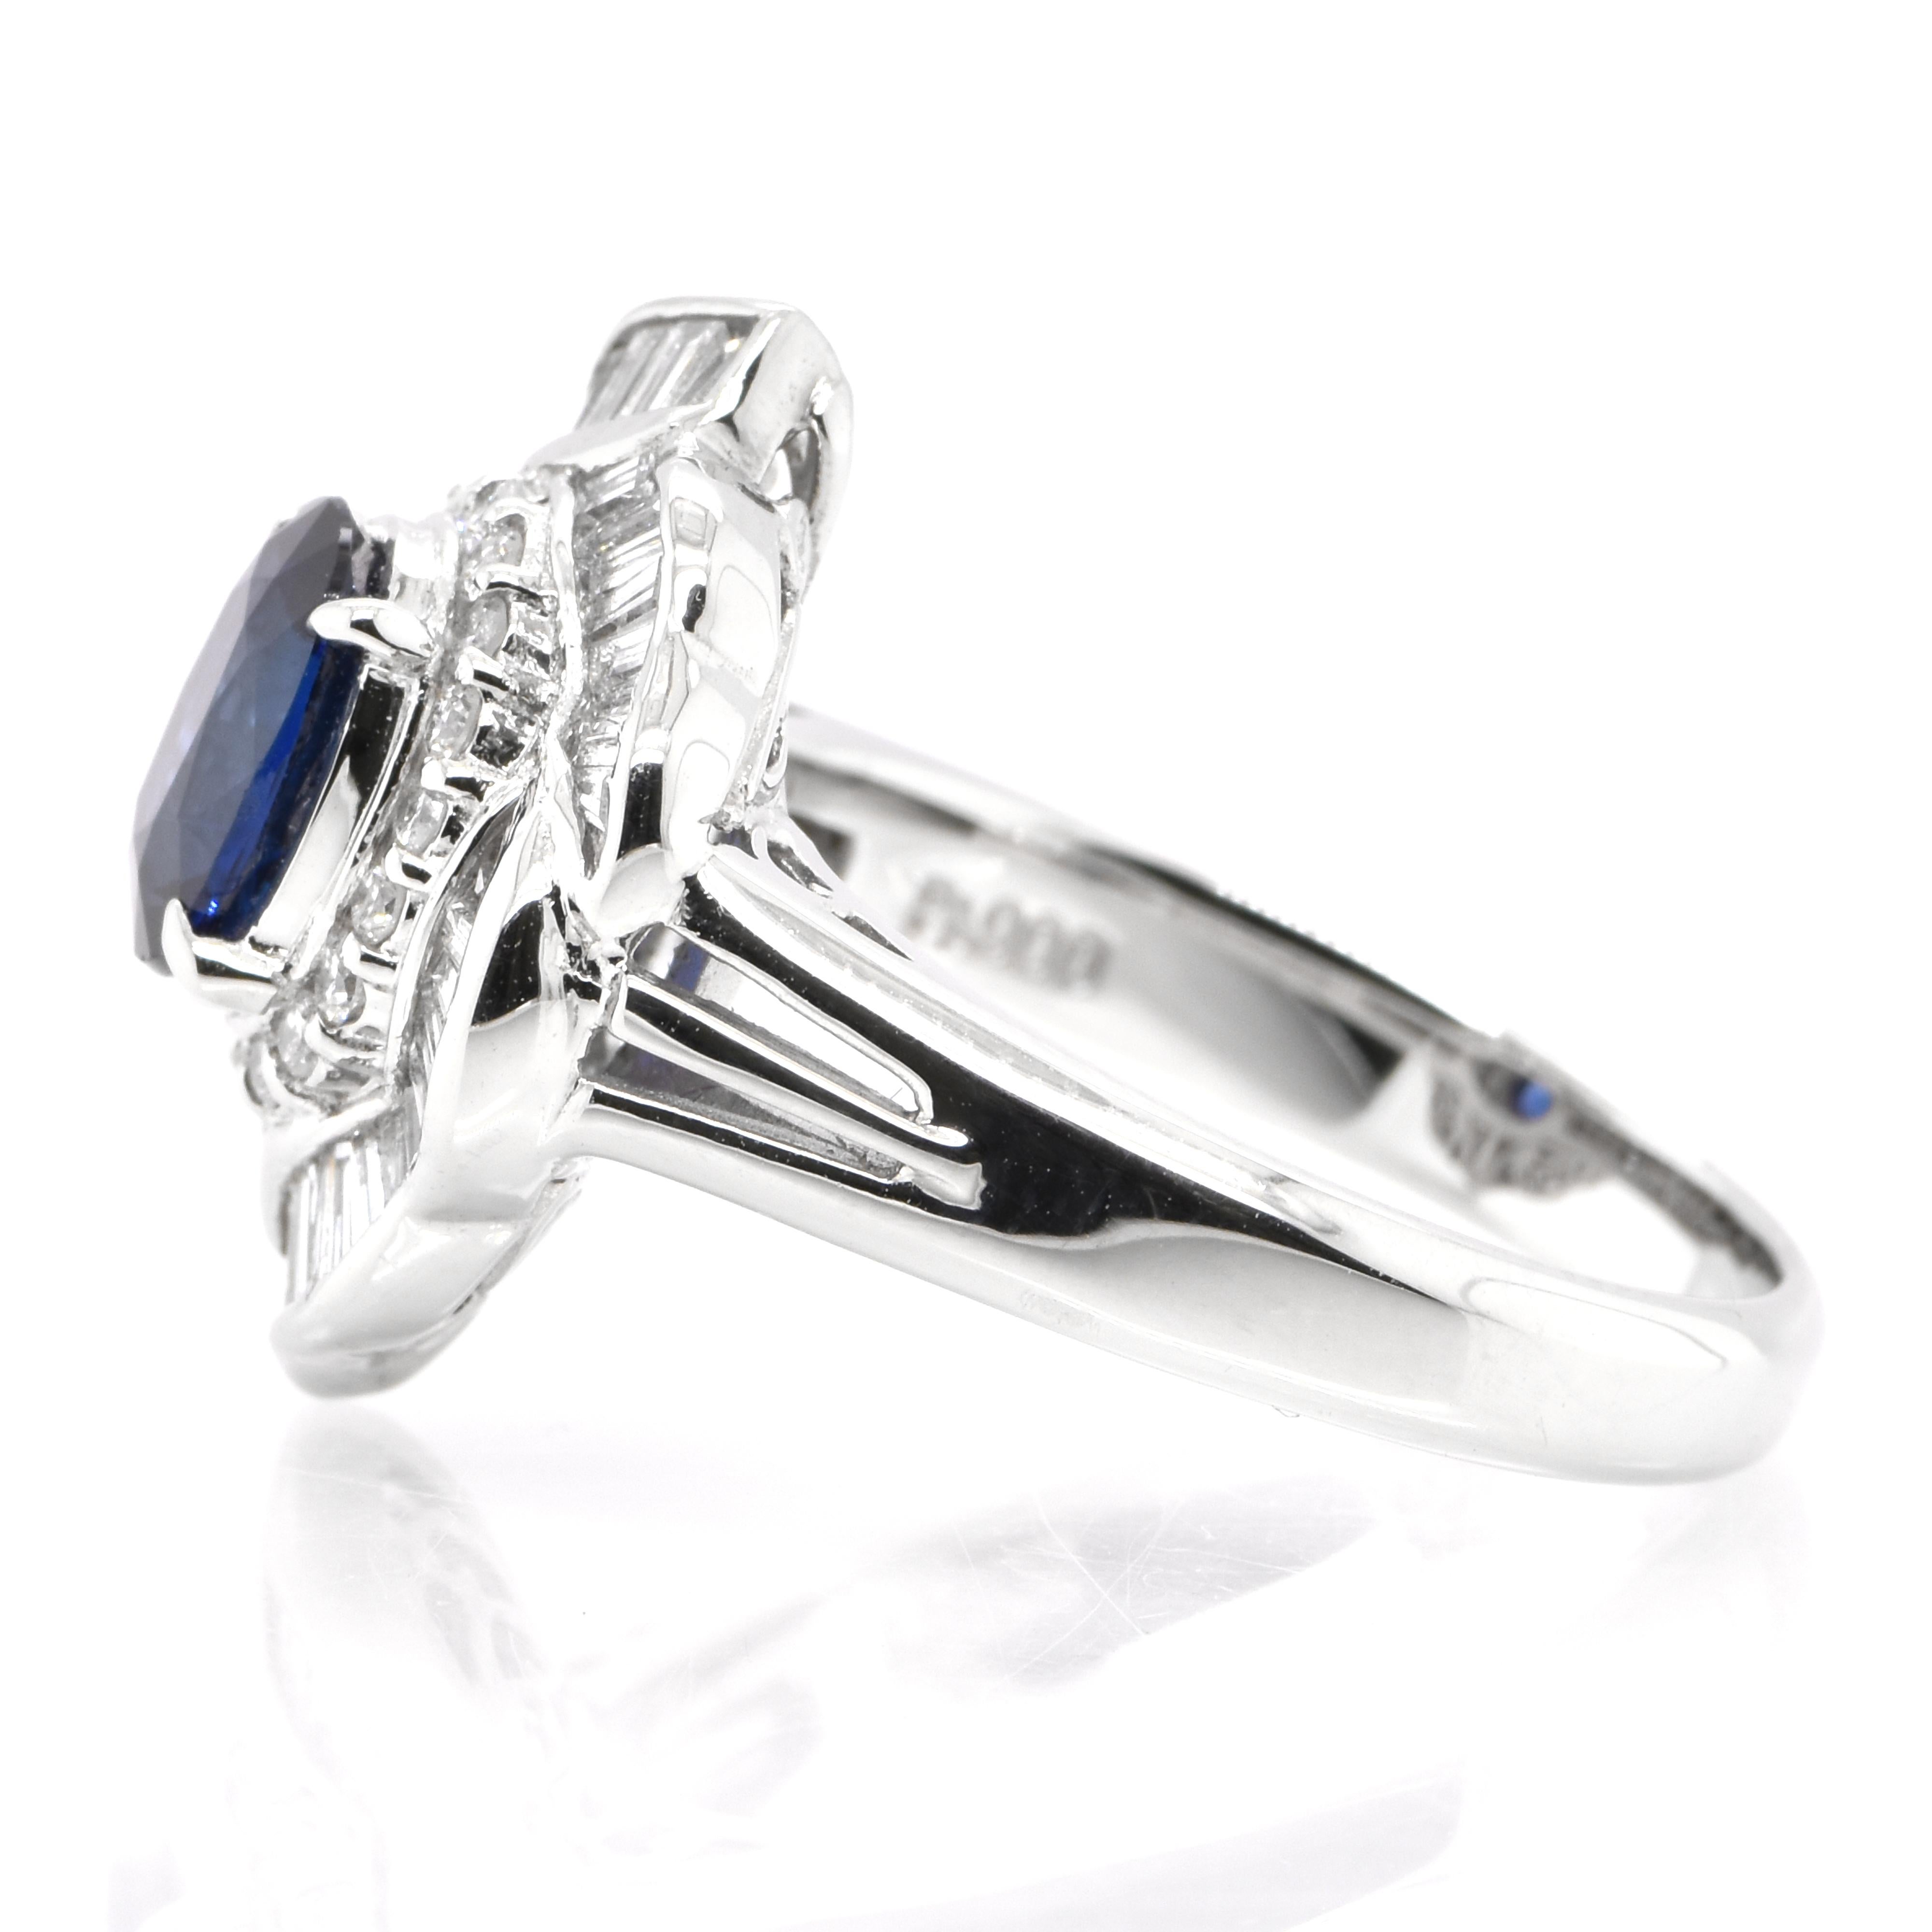 Oval Cut 1.28 Carat Natural Sapphire and Diamond Vintage Ring Set in Platinum